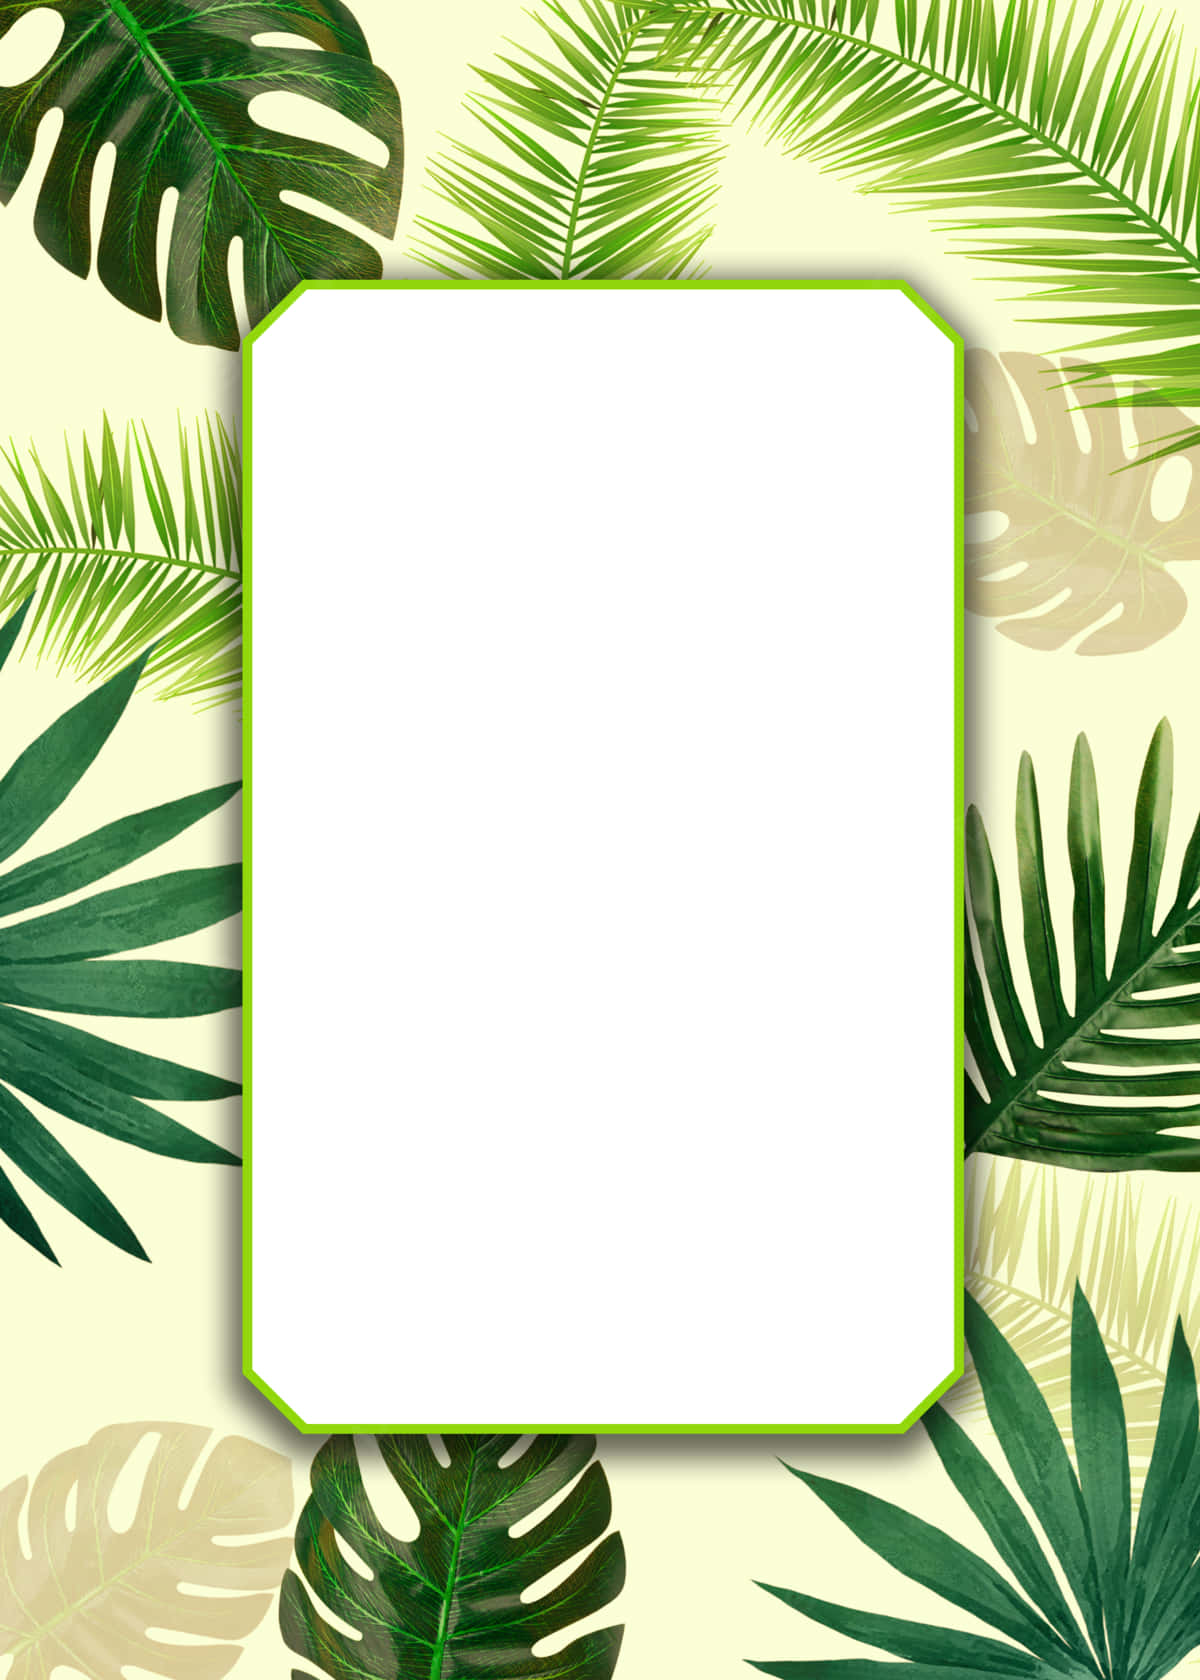 "Aesthetic view of tropical palm leaves on a white background" Wallpaper